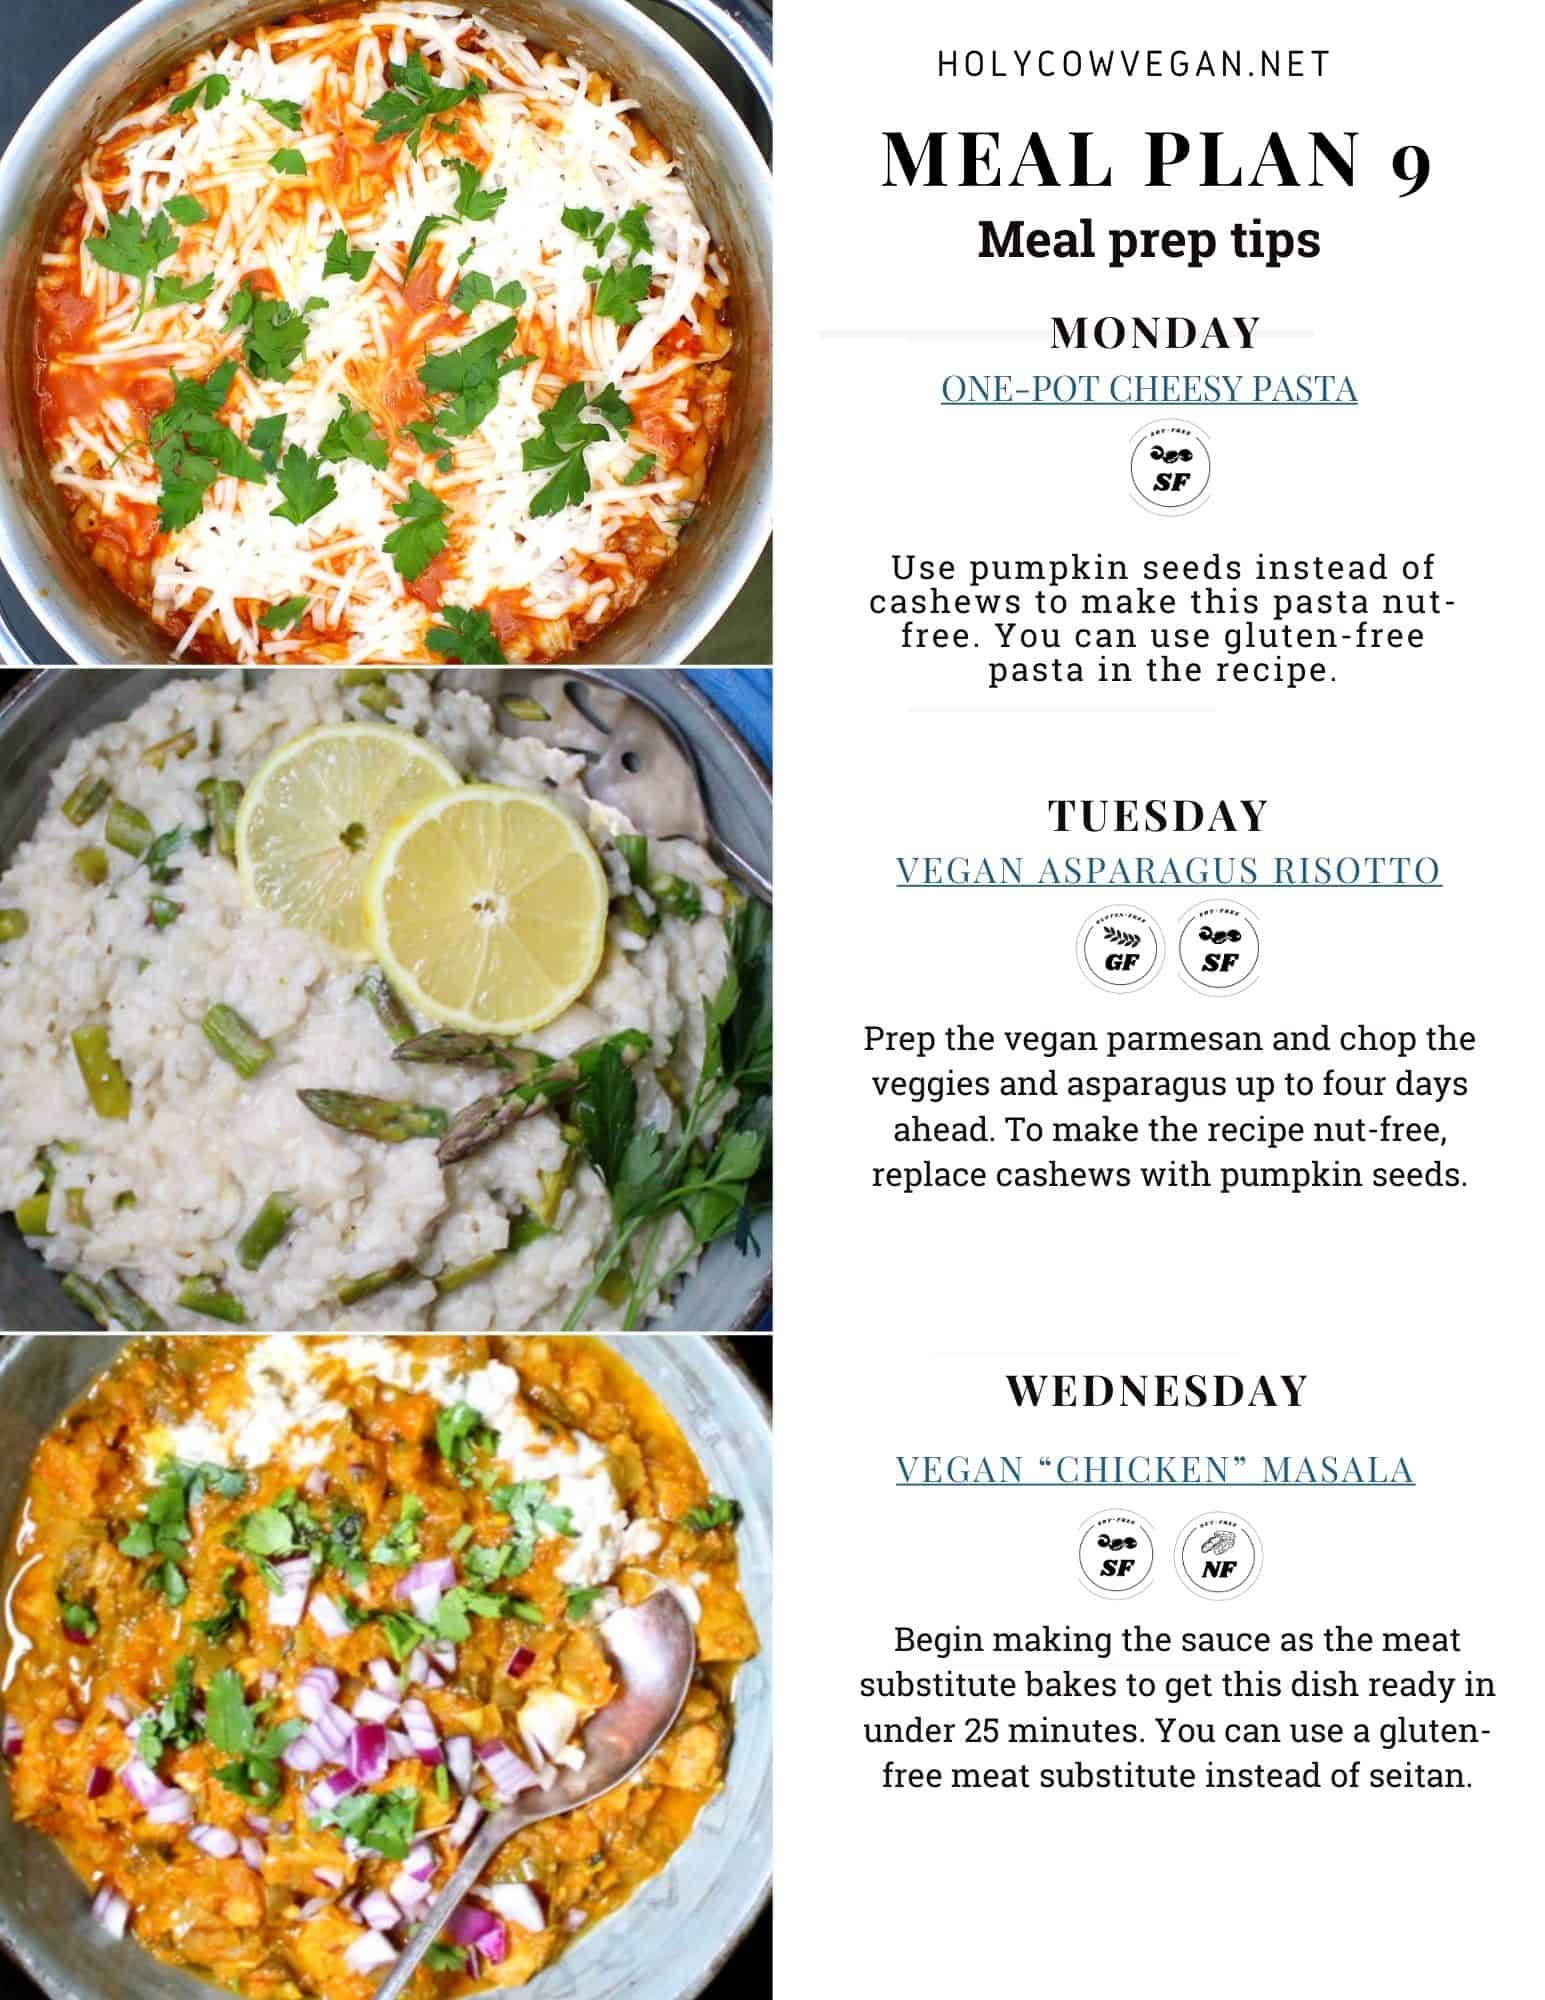 Front page of vegan meal plan 9 with images of three vegan recipes, meal prep instructions and allergy guide.